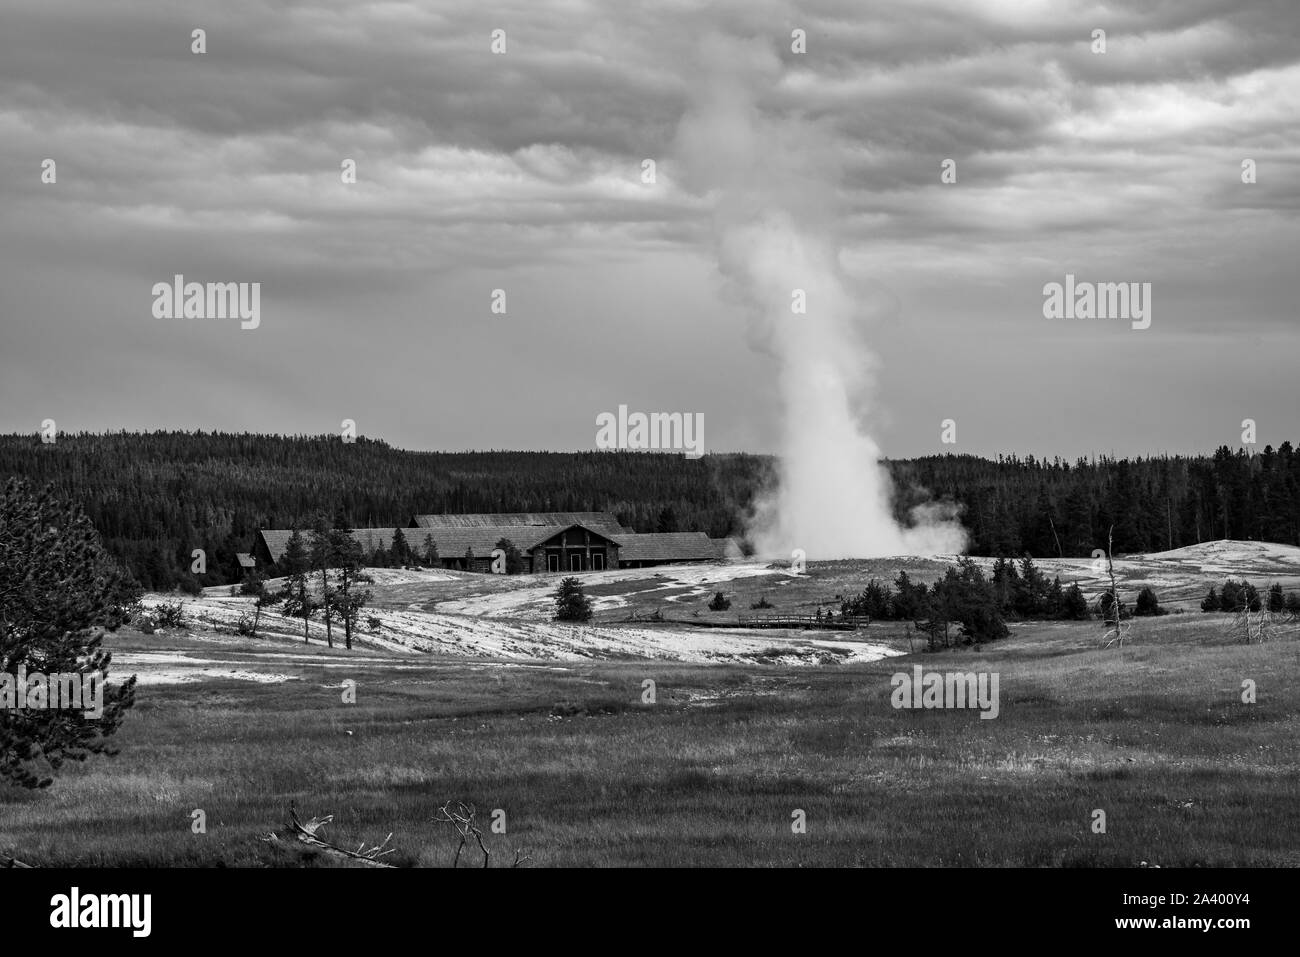 Old faithful geyser in Yellowstone national park during an eruption, in black and white Stock Photo